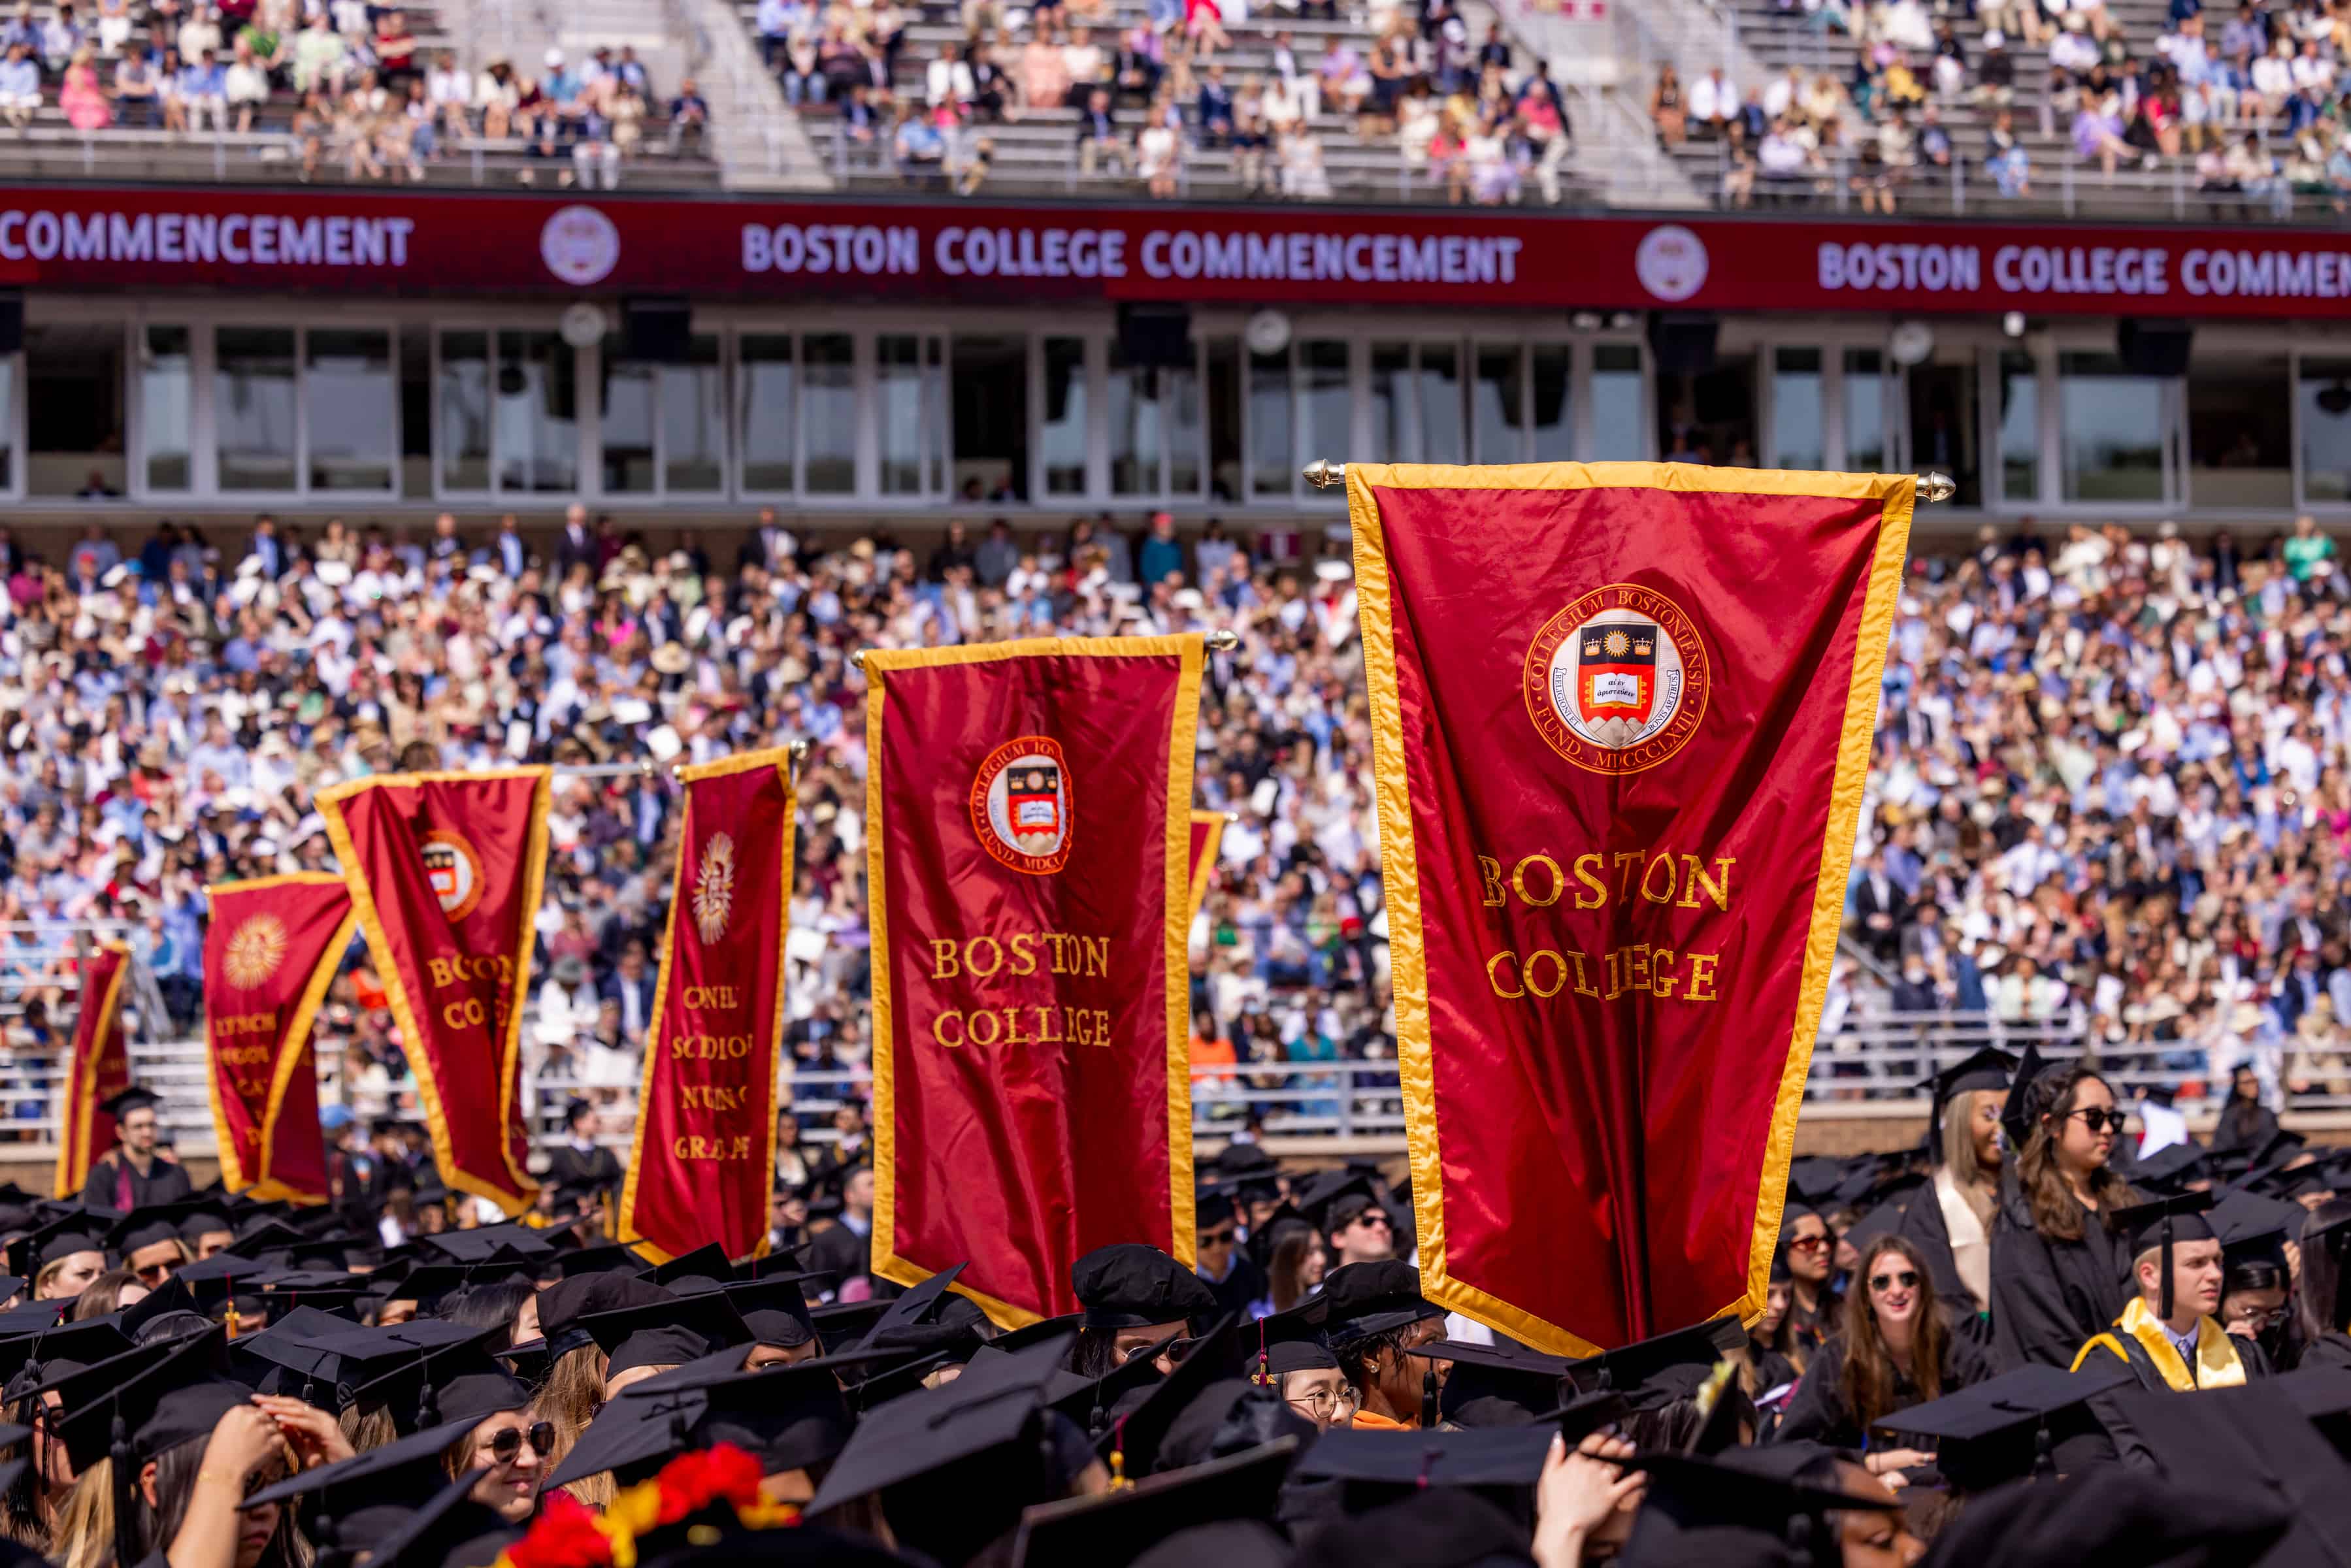 Boston College banners at Commencement